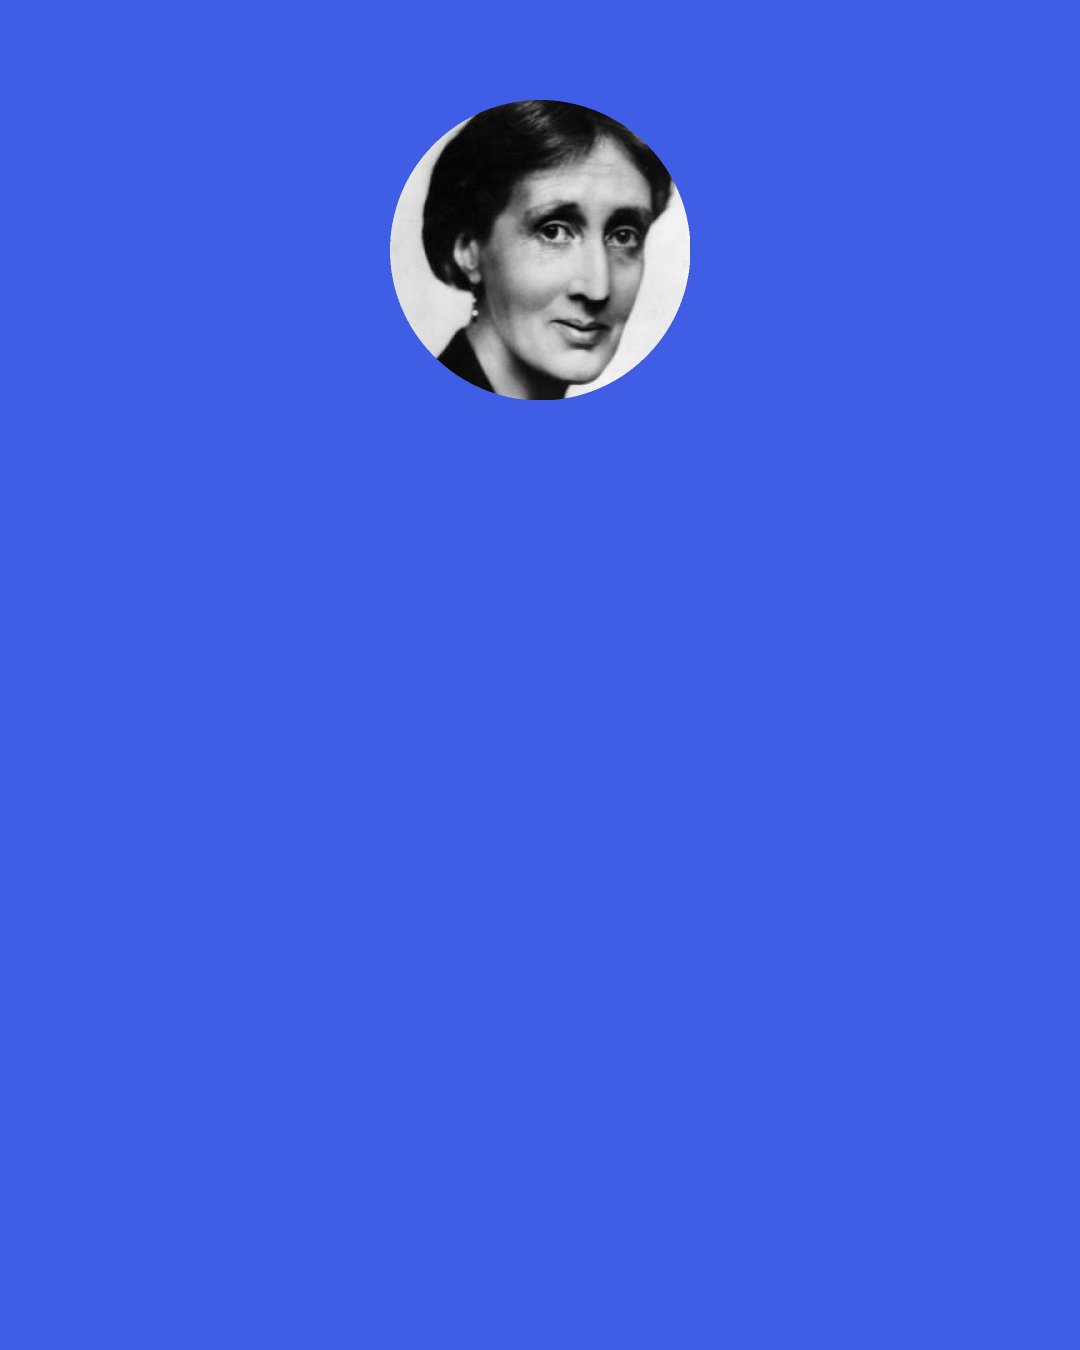 Virginia Woolf: madam," the man cried, leaping to the ground, "you're hurt!" "I'm dead, sir!" she replied. A few minutes later, they became engaged.